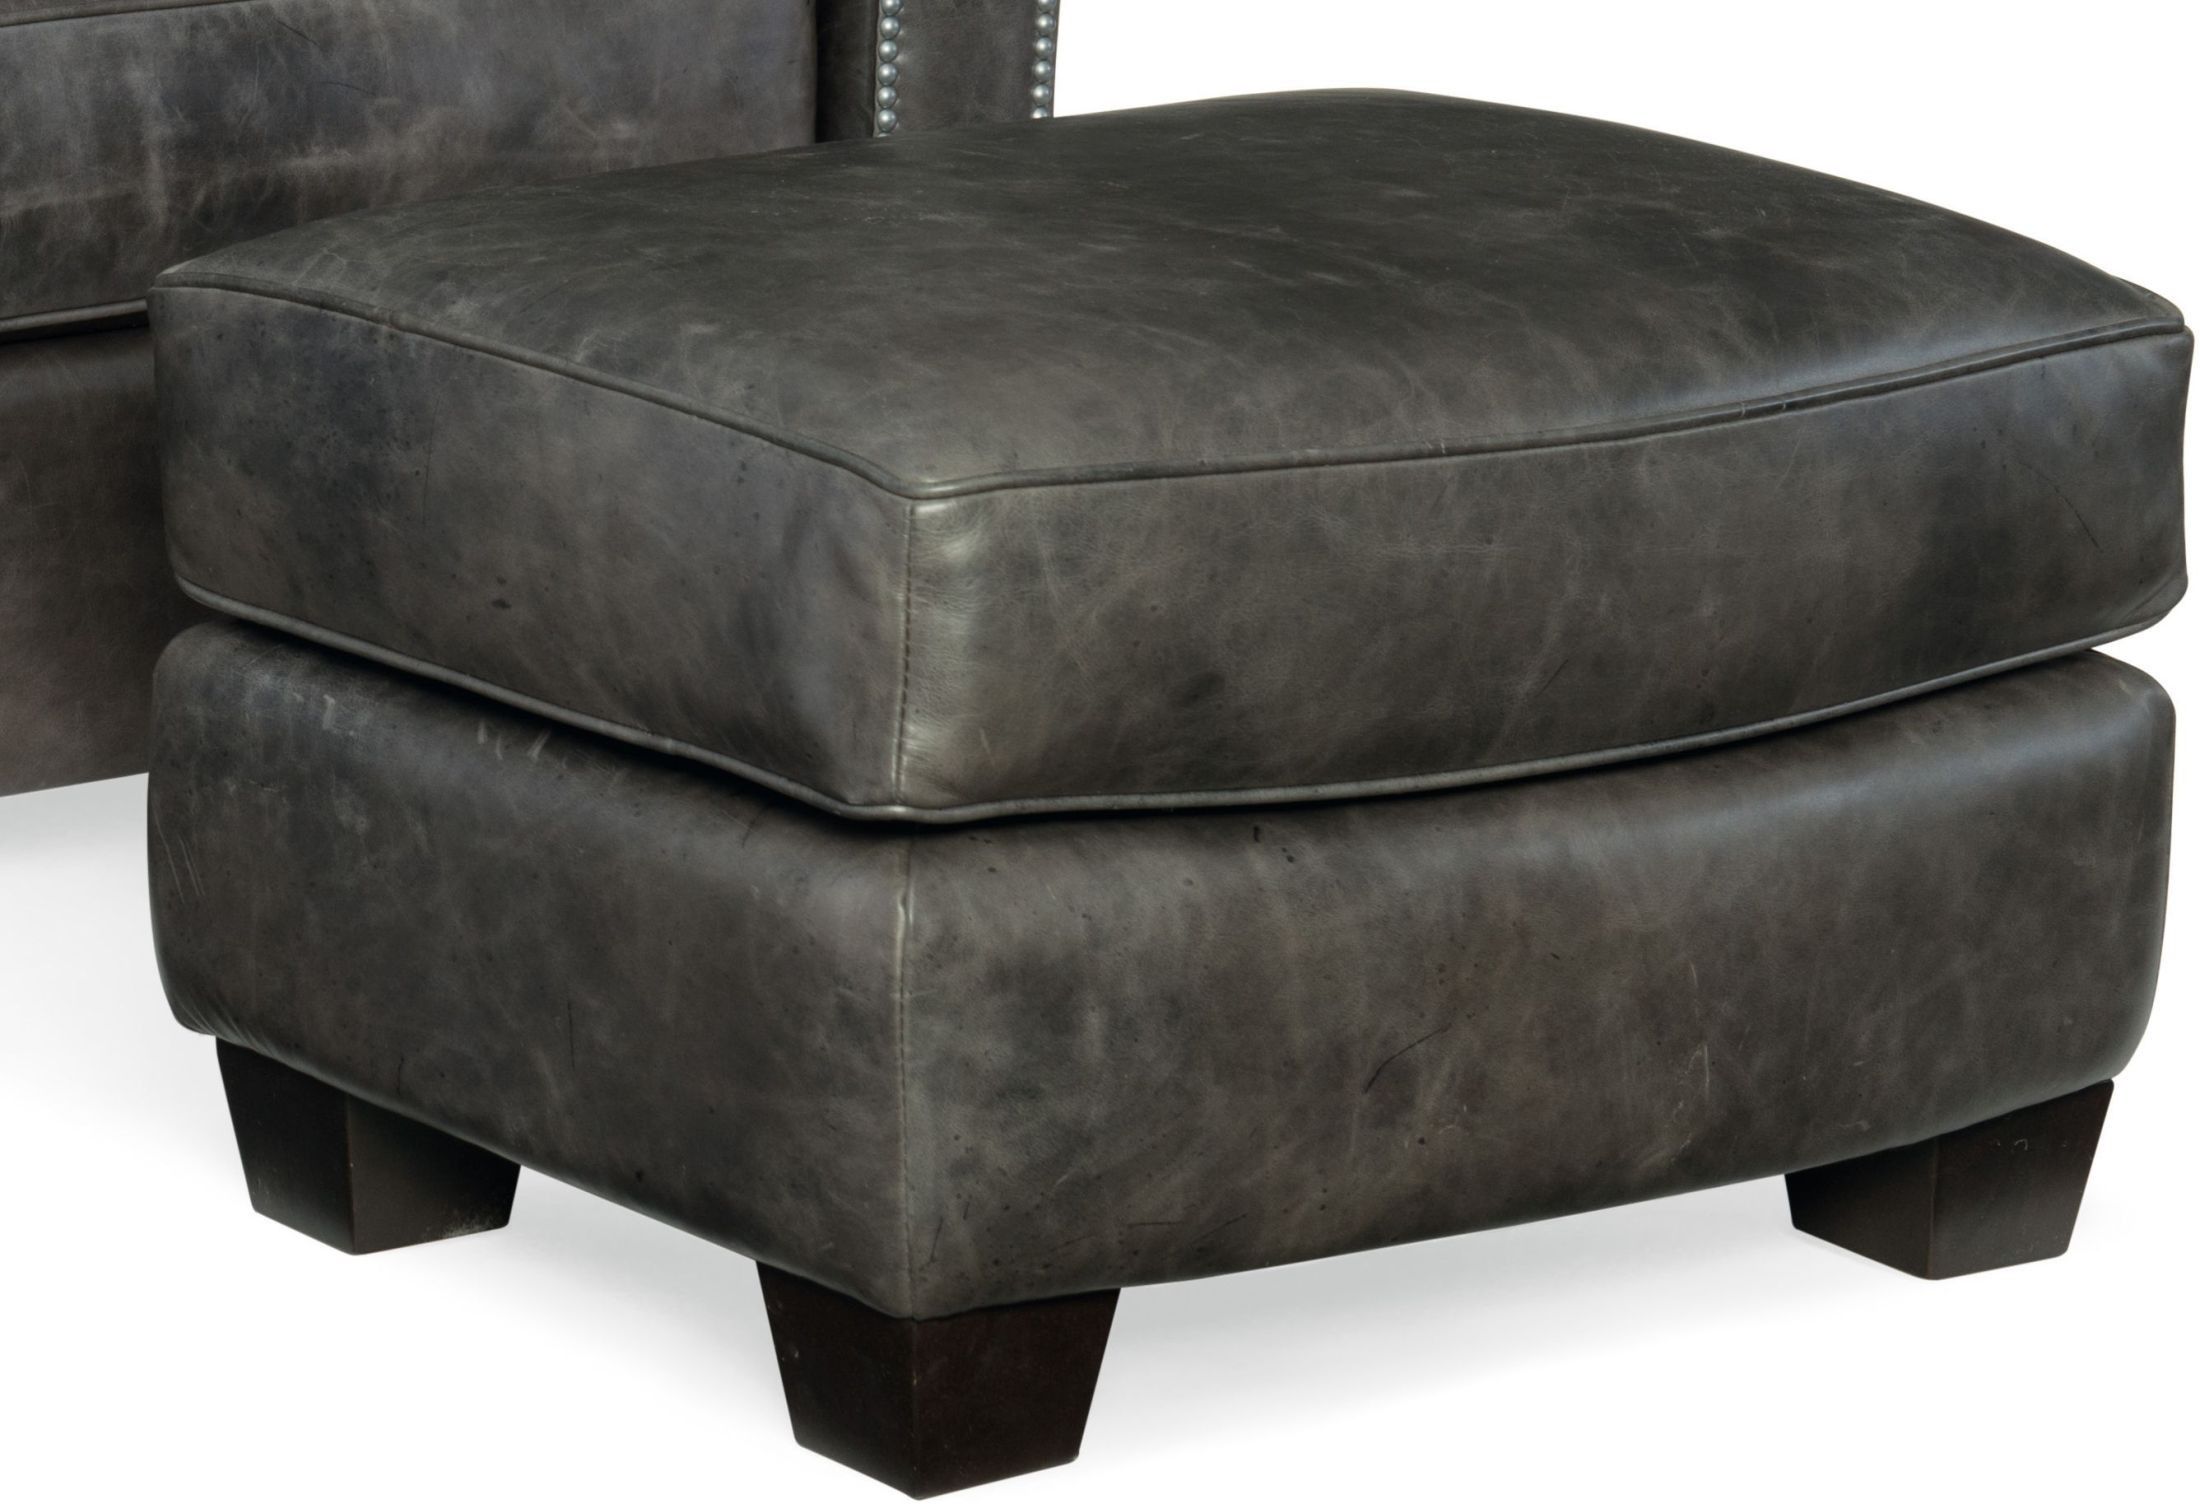 Trellis Gray Leather Ottoman From Hooker | Coleman Furniture Pertaining To Gray Moroccan Inspired Pouf Ottomans (View 20 of 20)